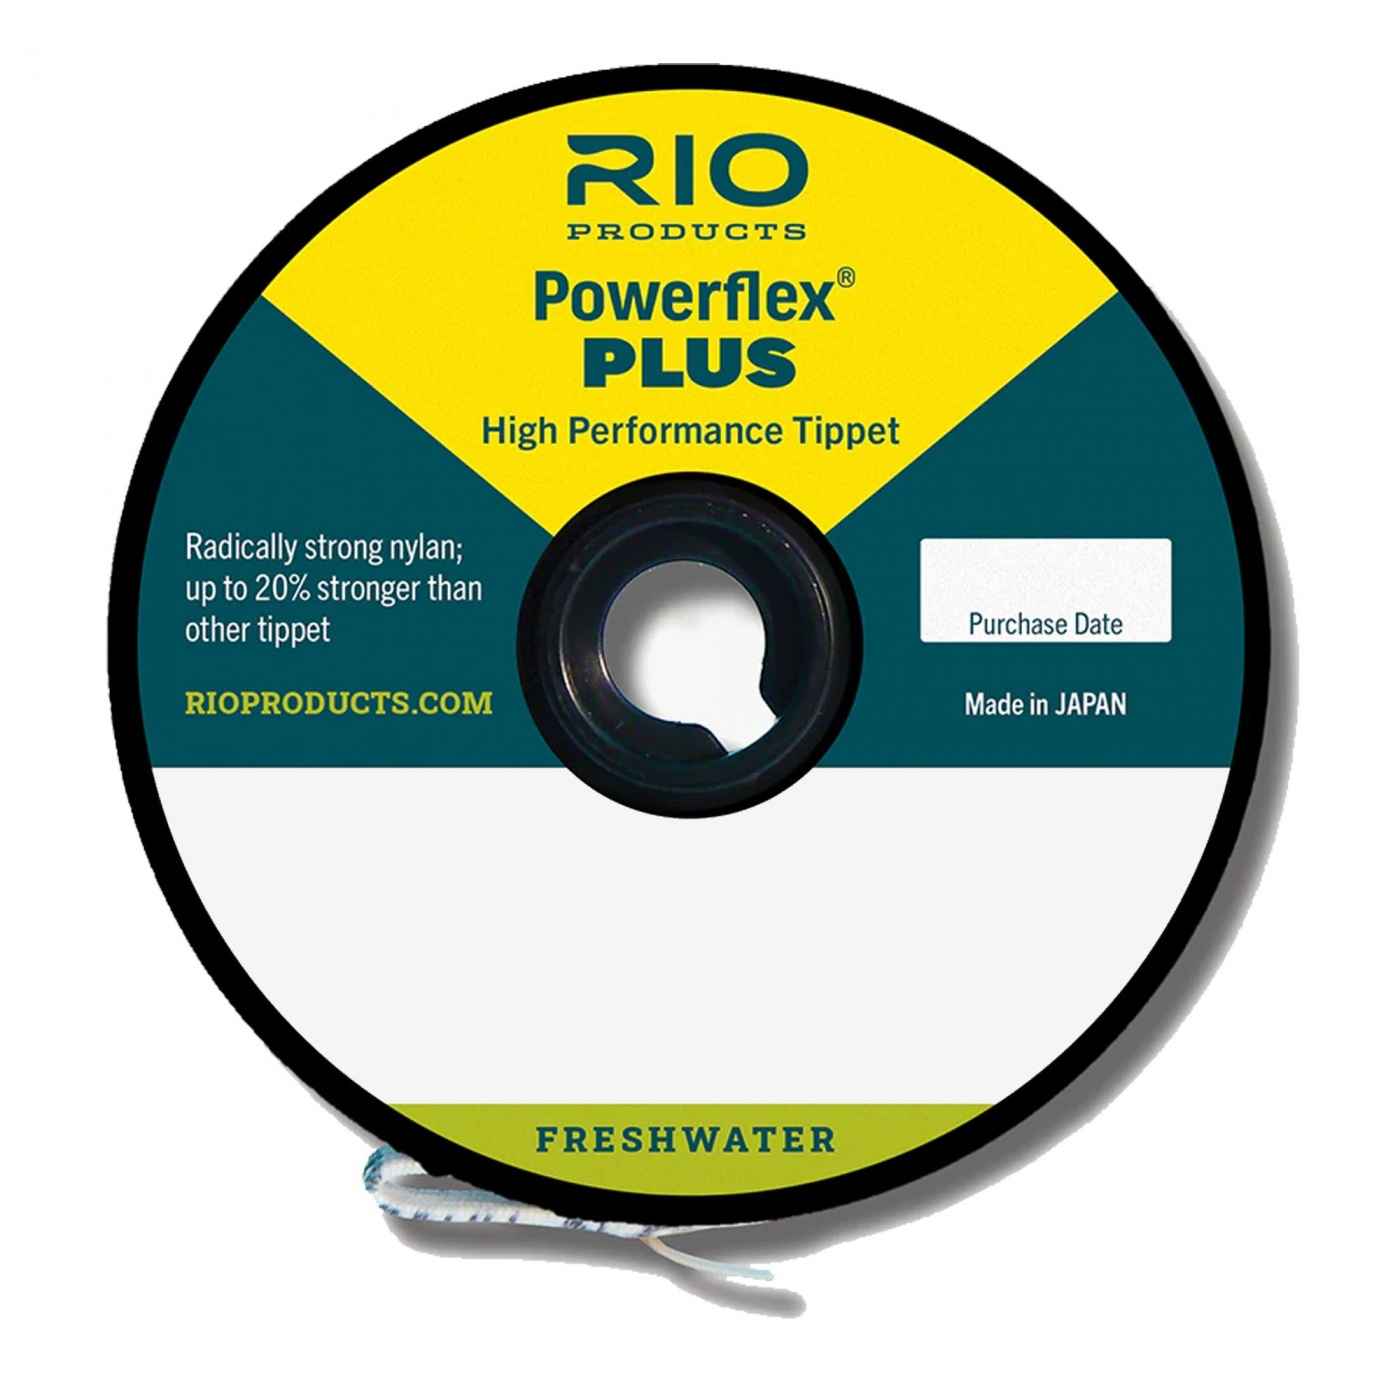 Rio Products Powerflex Plus Tippet Triple Pack 4X-6X For Trout & Grayling Fly Fishing